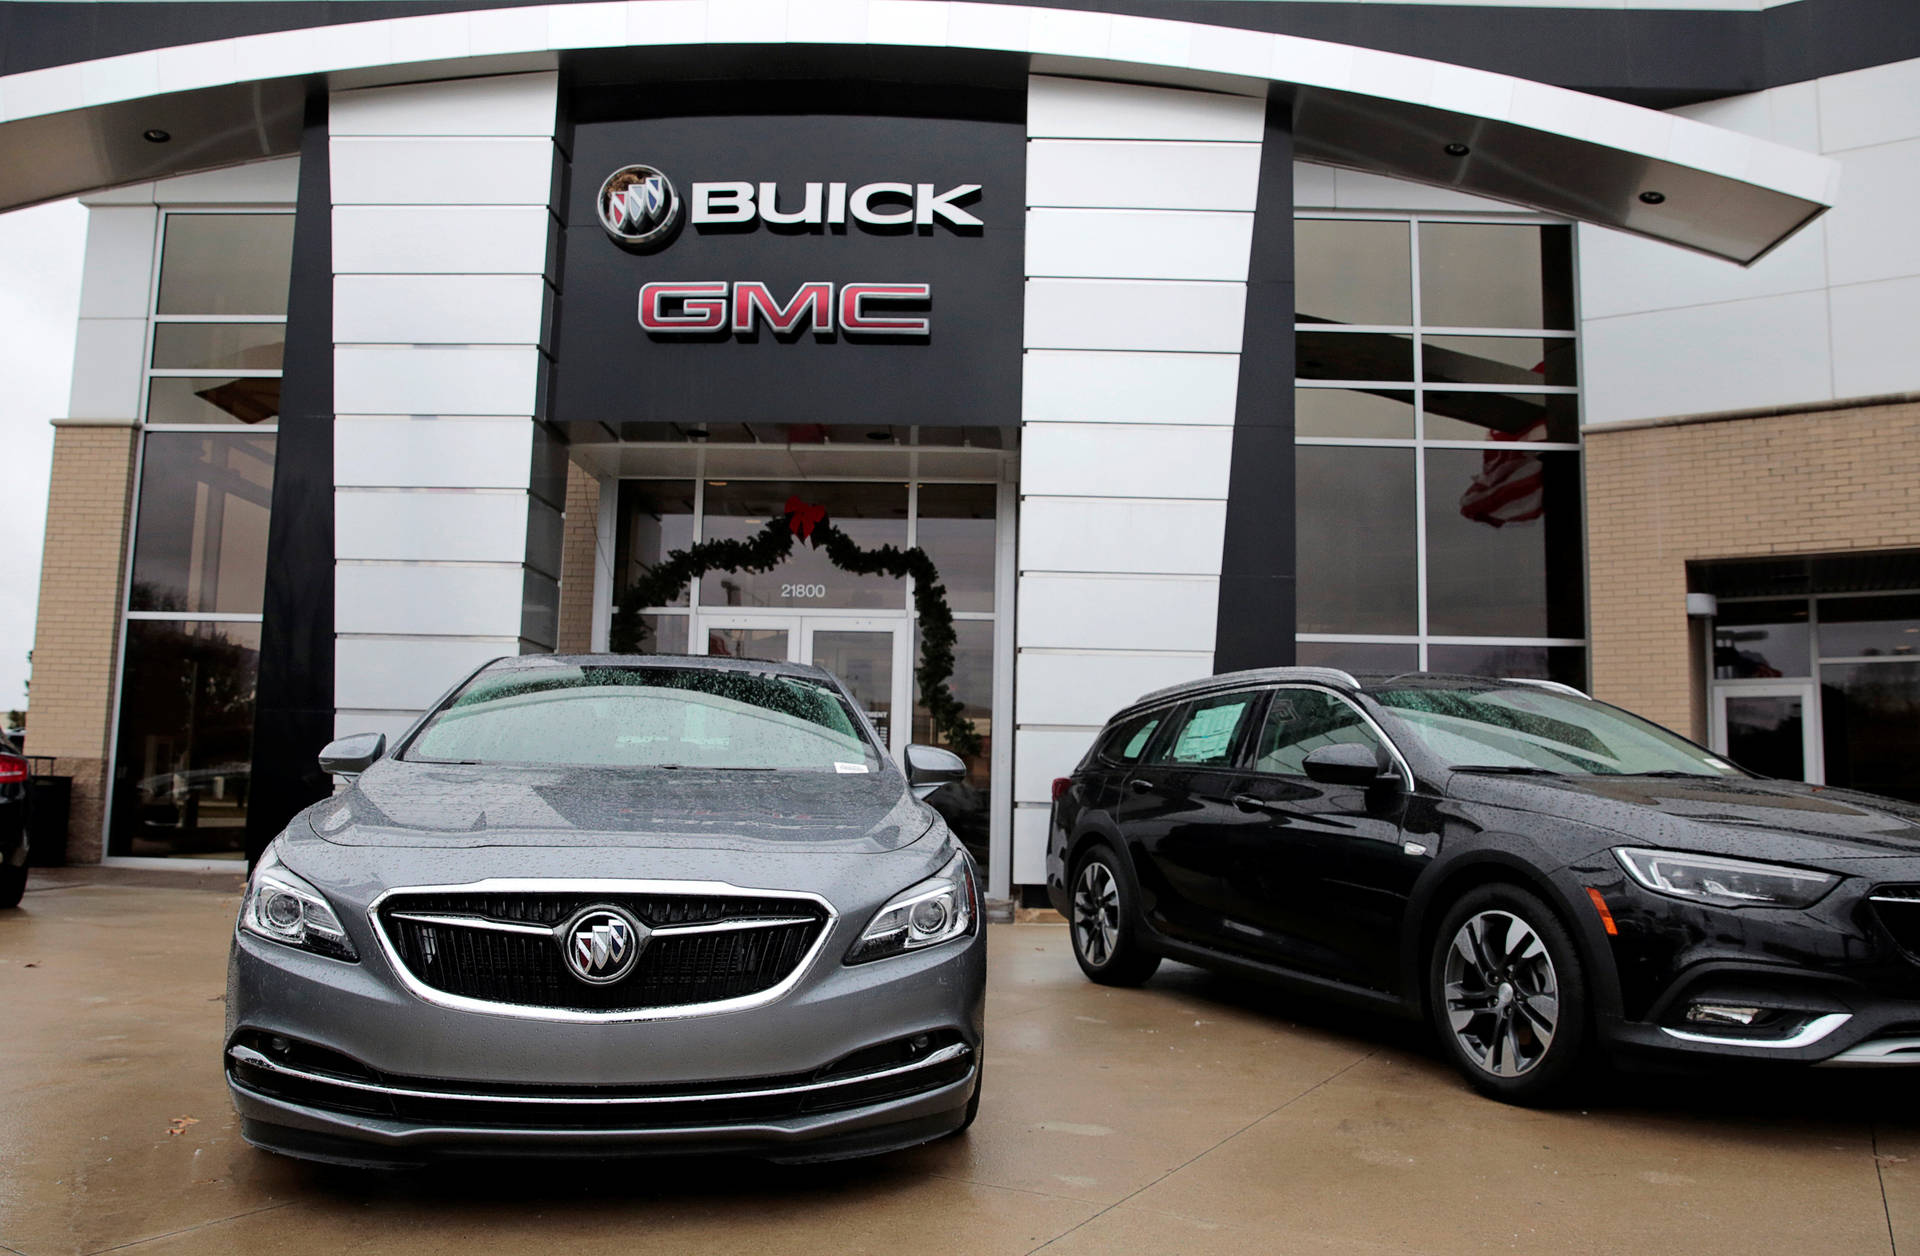 Buick And Gmc Car Dealership Background